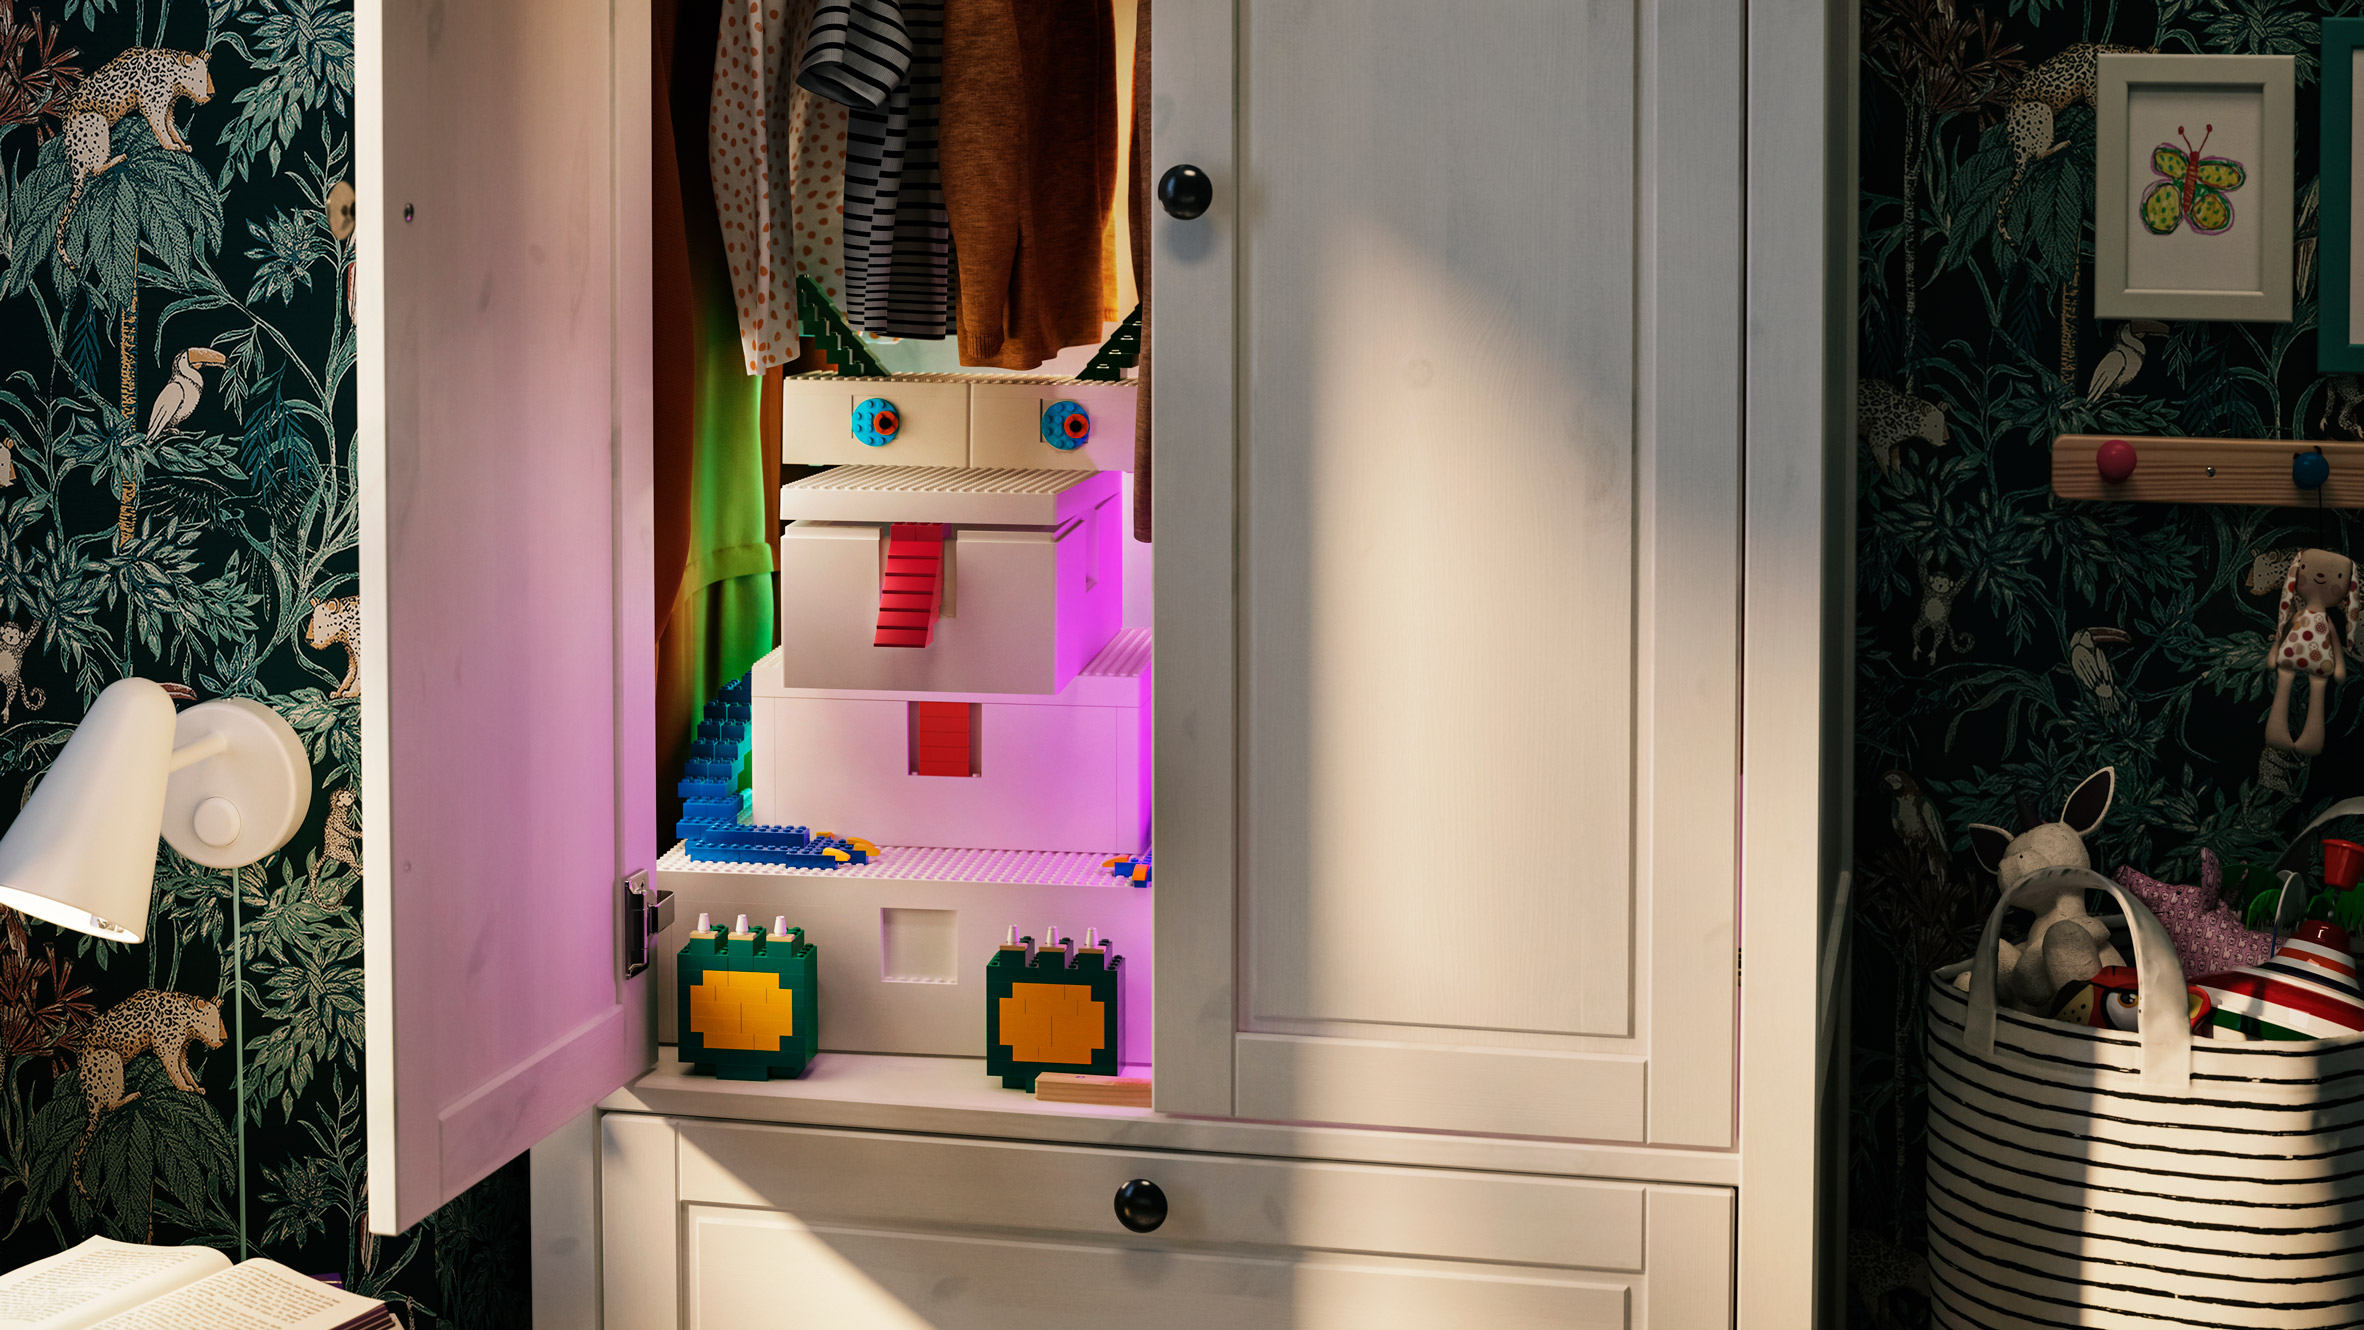 IKEA and Lego release Bygglek storage boxes that double as toys